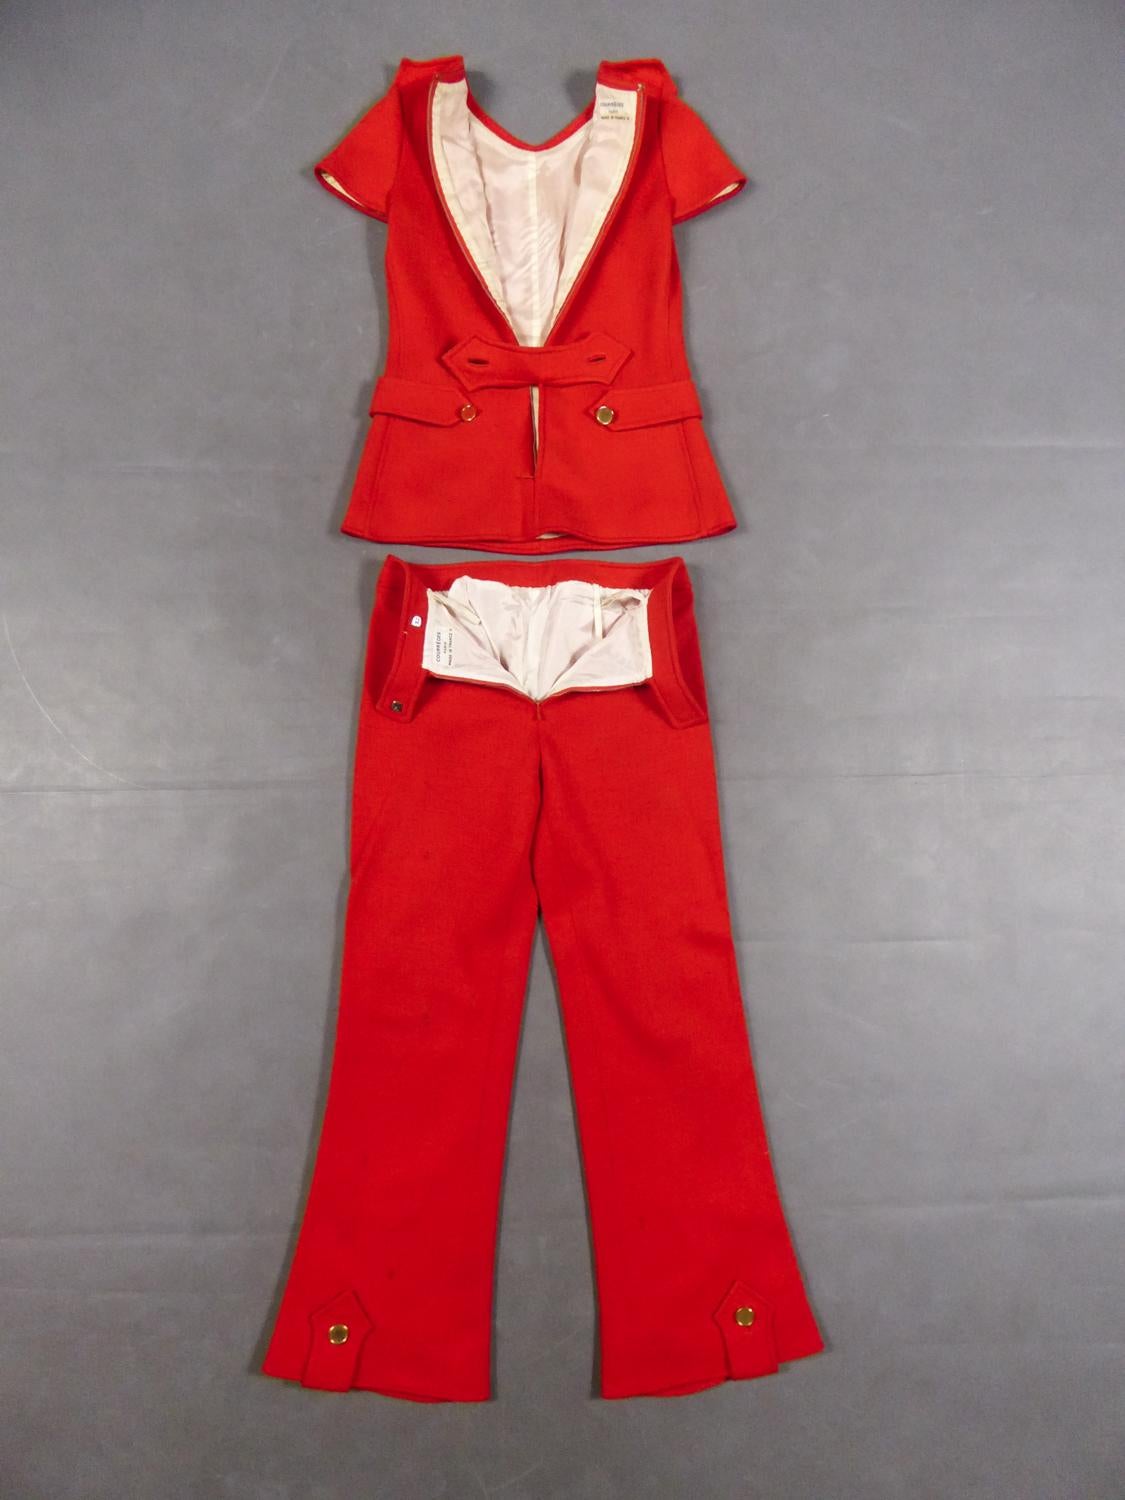 Circa 1972
France

André Courrèges Haute Couture tunic and pants set numbered 7852 and 7857 from the early 1970s. Thick coral red wool jersey entirely overstitched and lined with off-white nylon. Top with short sleeves, shoulder tabs and sewn waist